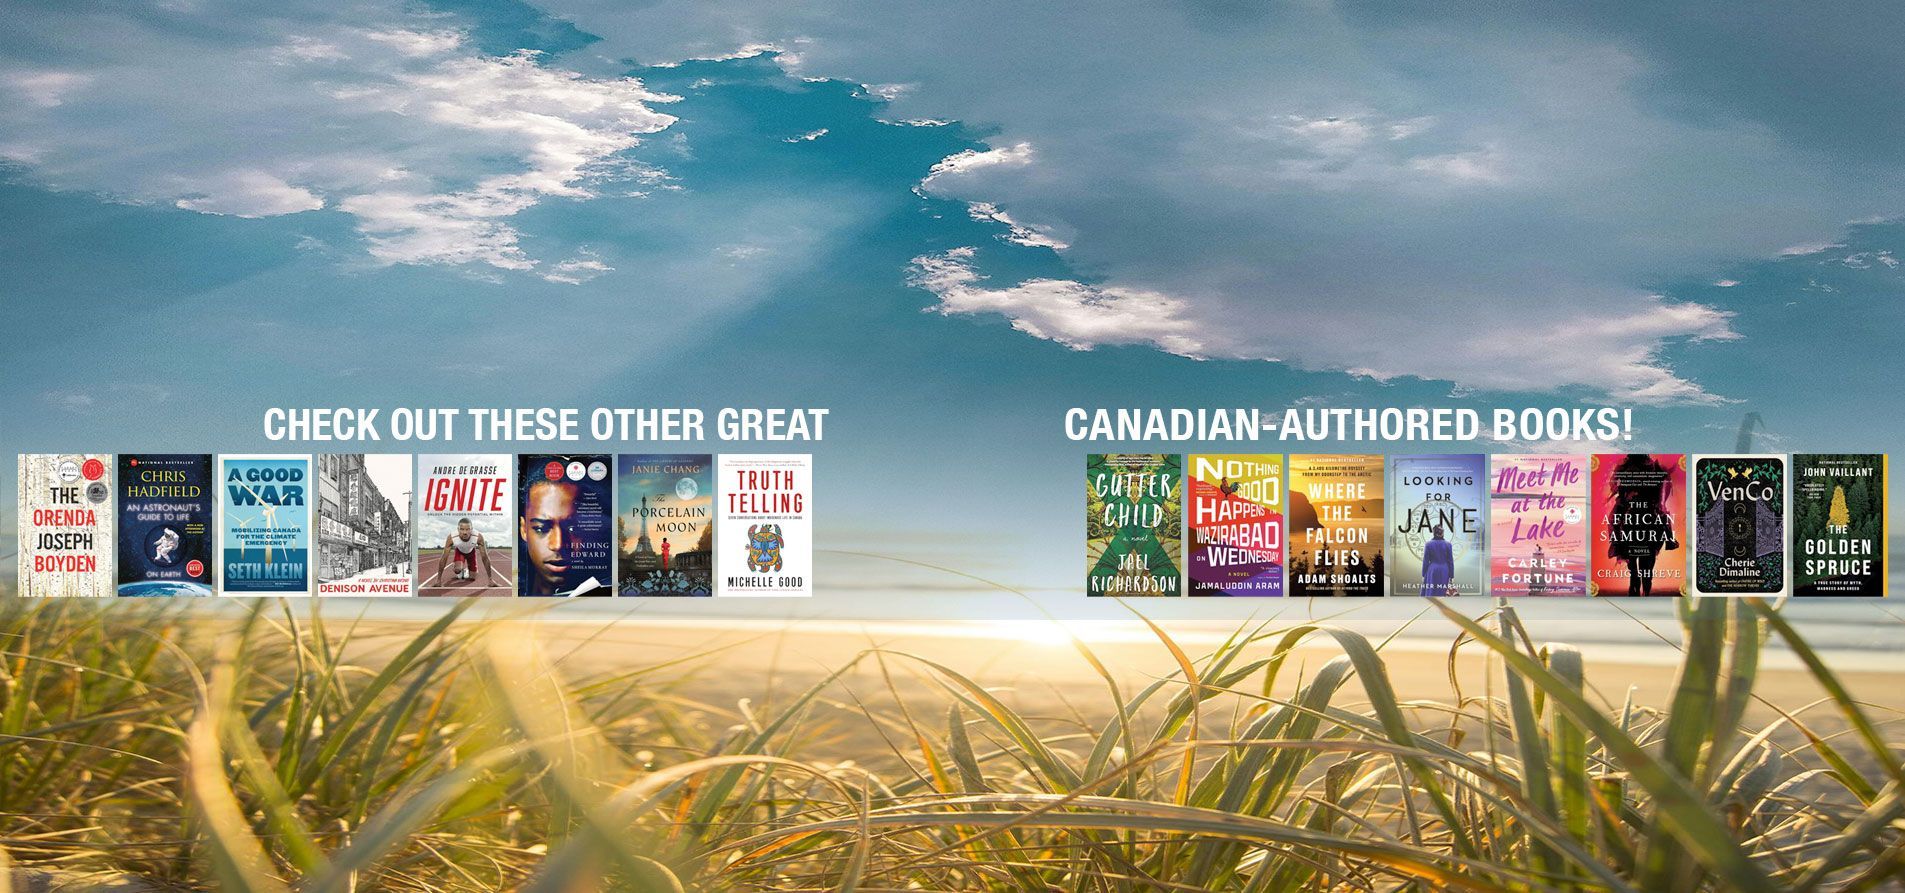 Other book covers by Canadian Authors
